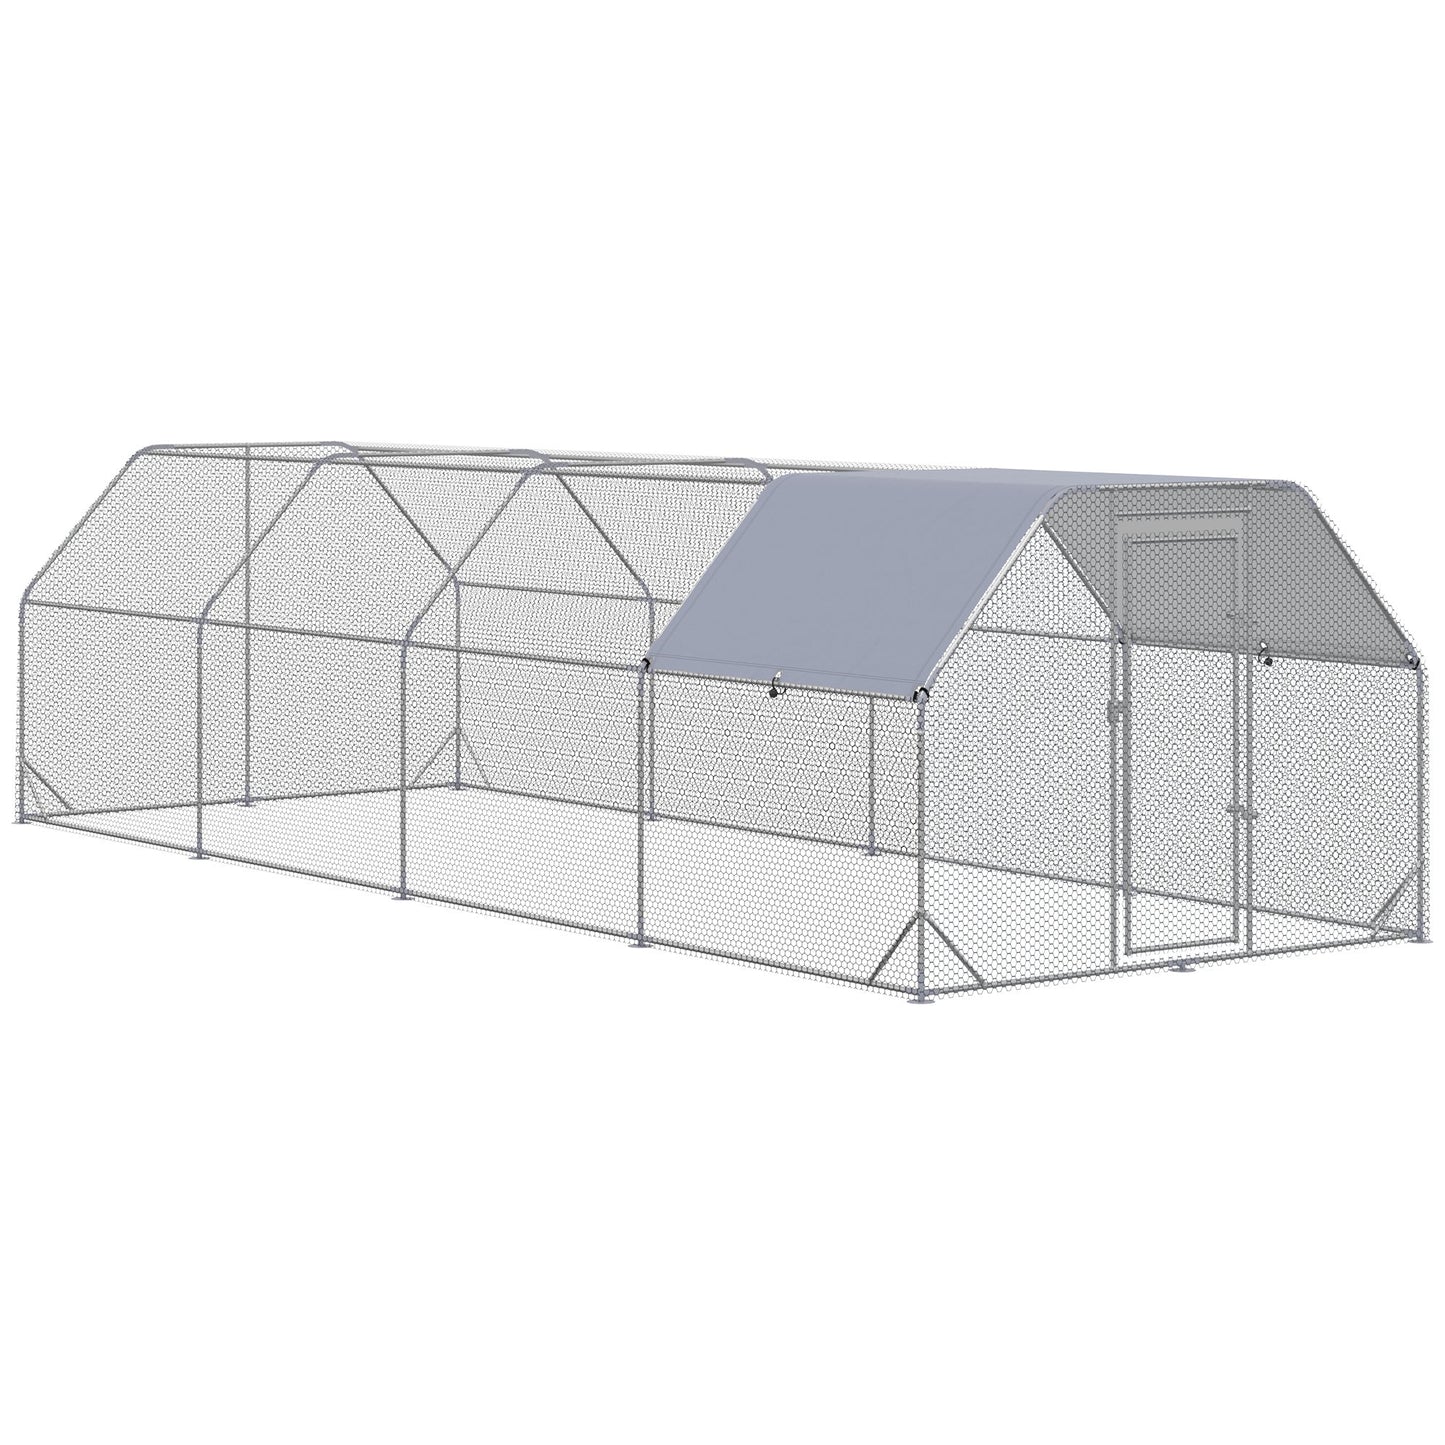 Metal Chicken Coop for 20-25 Chickens, Walk In Chicken Run Outdoor with Cover for Backyard Farm, 24.9' x 9.2' x 6.4' at Gallery Canada